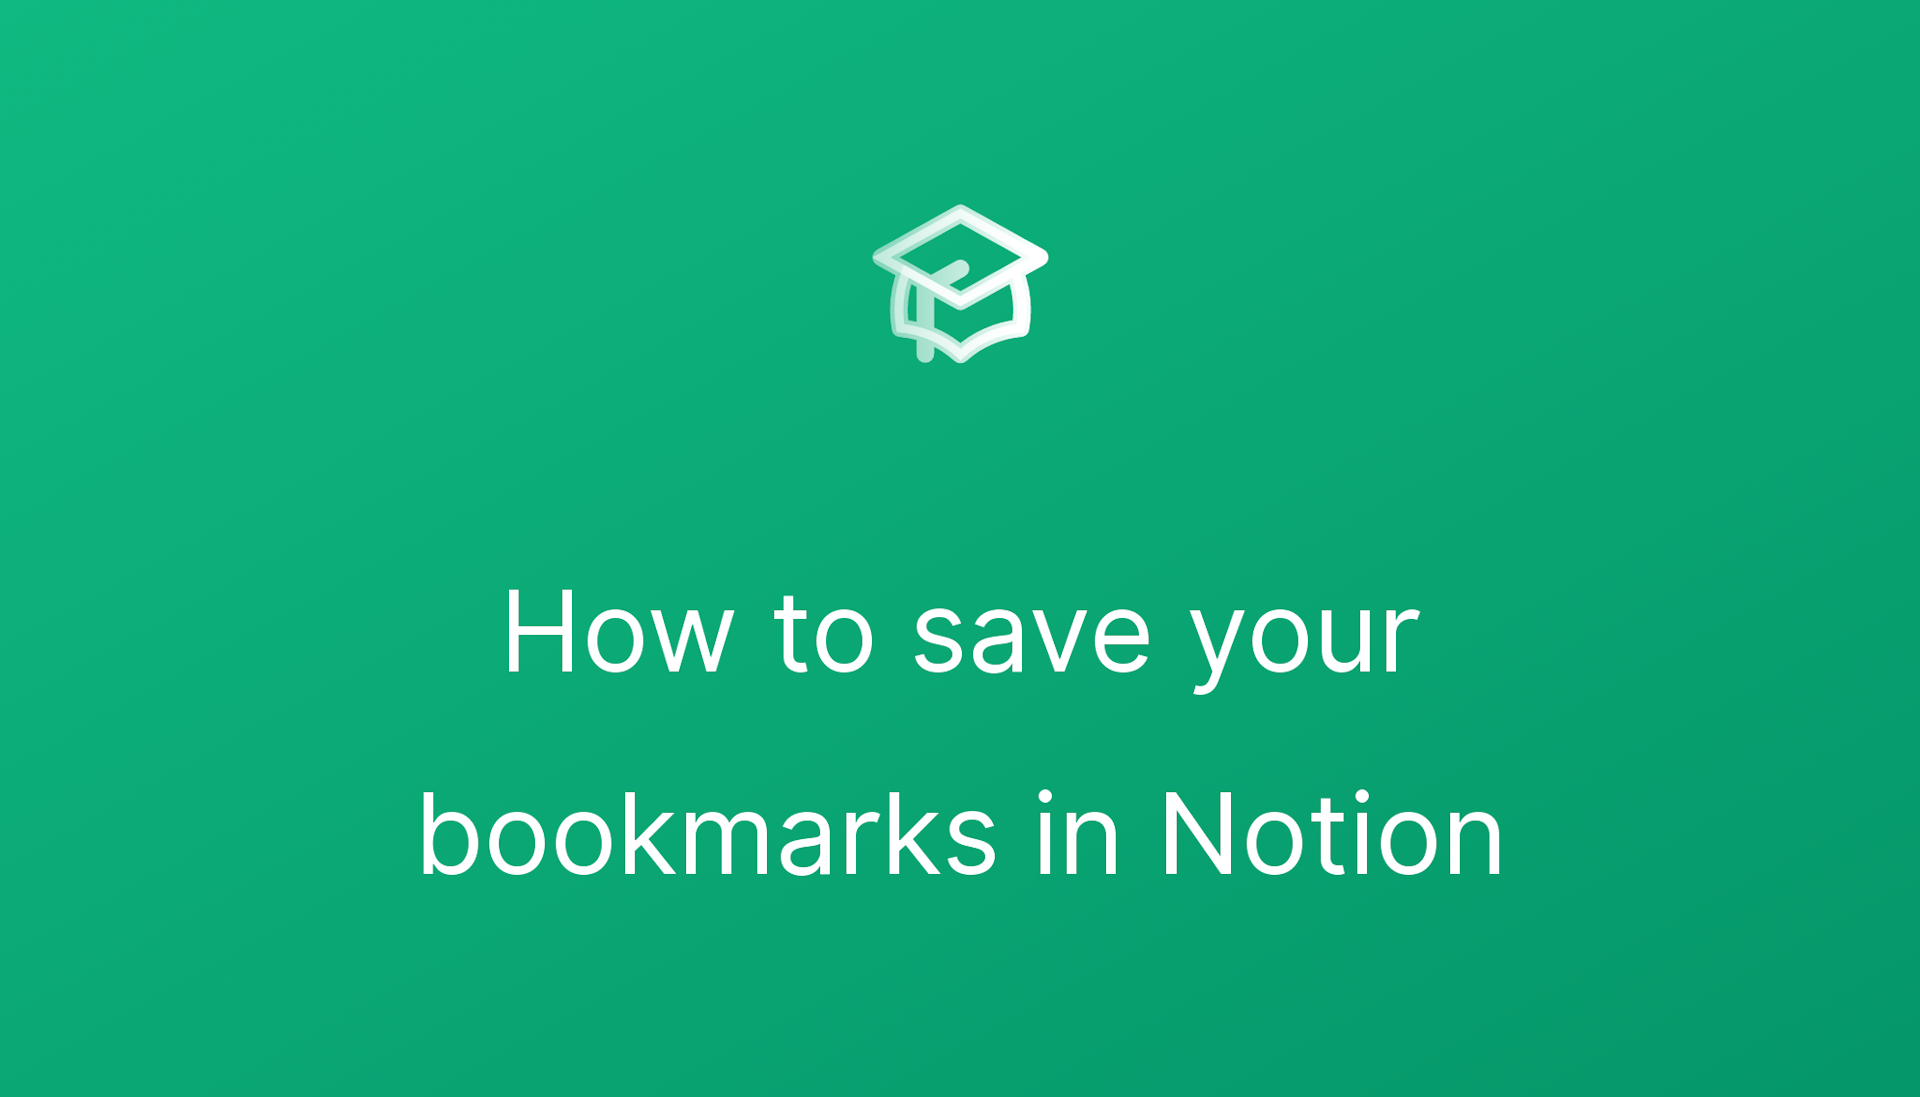 How to save your bookmarks in Notion